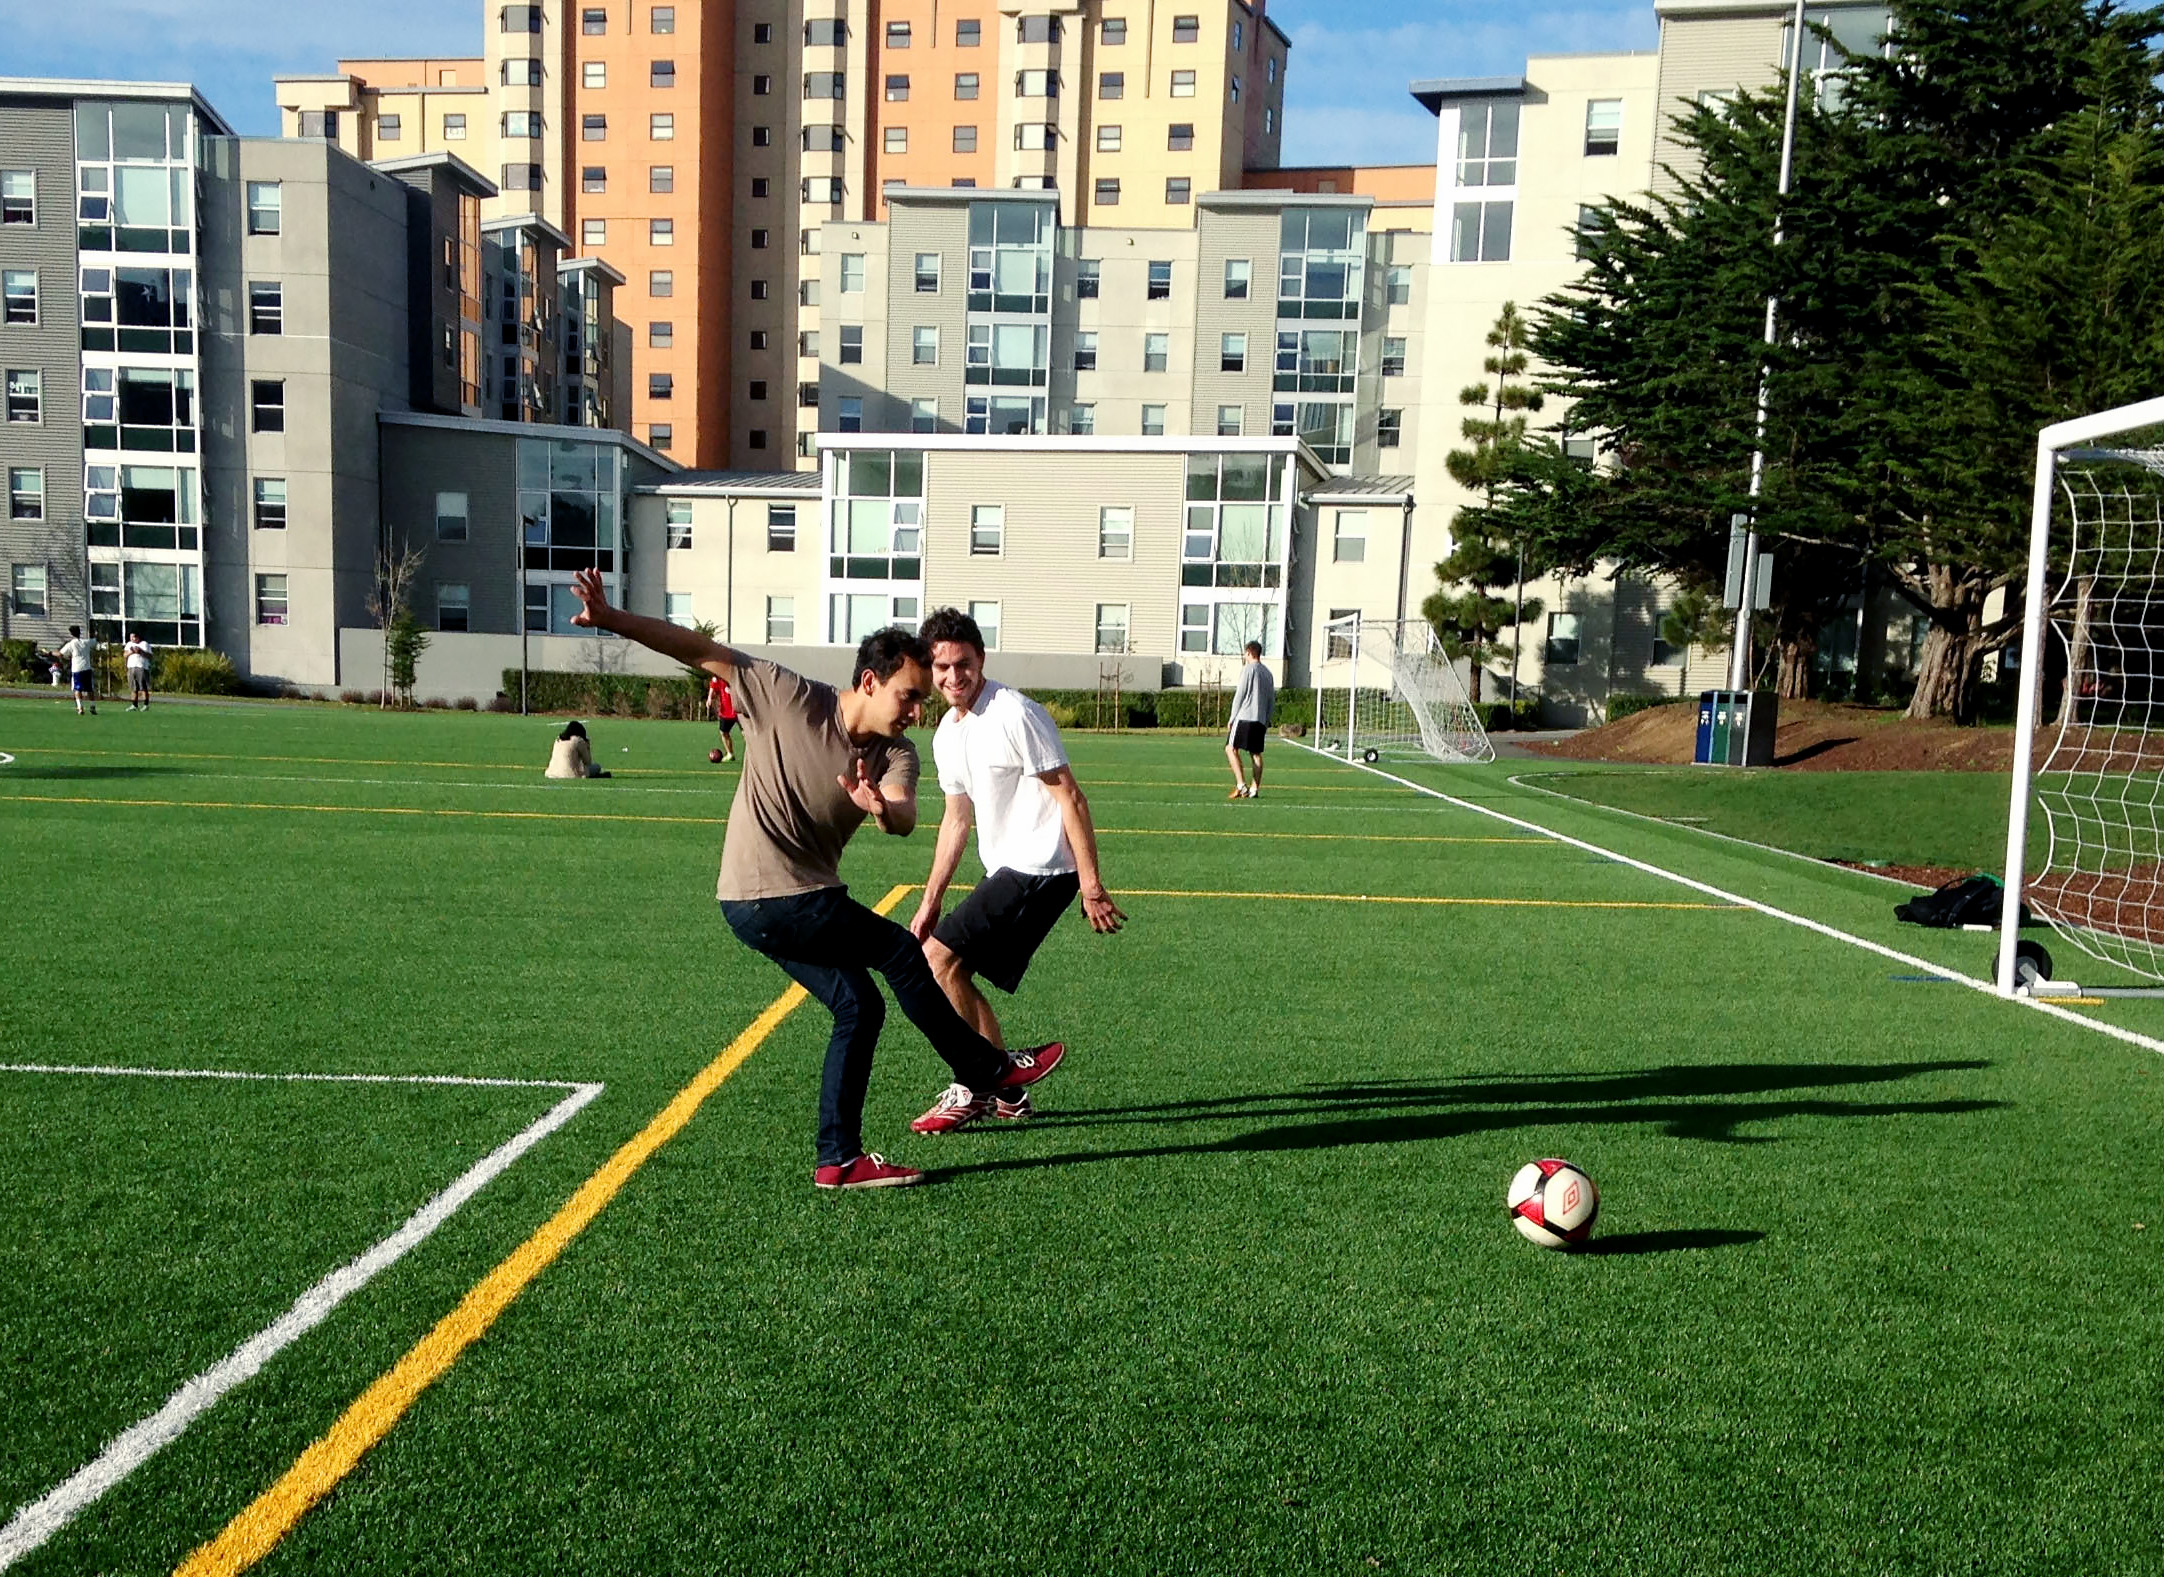 Students playing soccer on West Campus Green